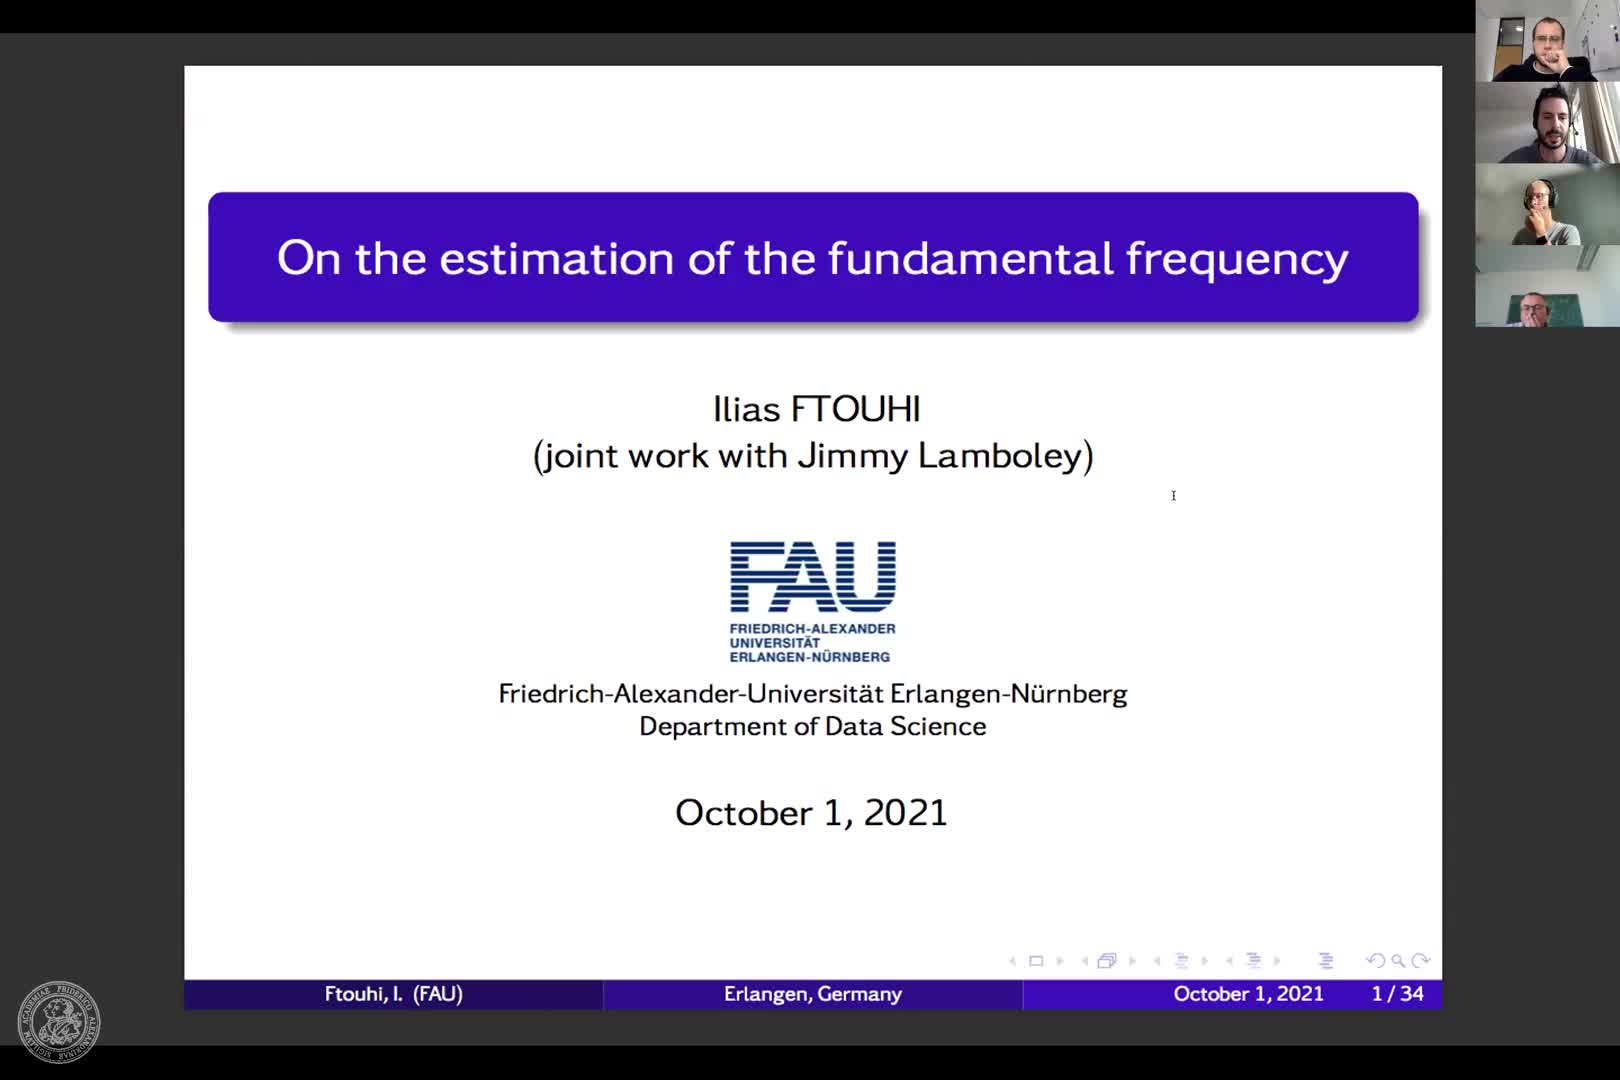 On the estimation of fundamental frequency (I. Ftouhi, FAU)) preview image